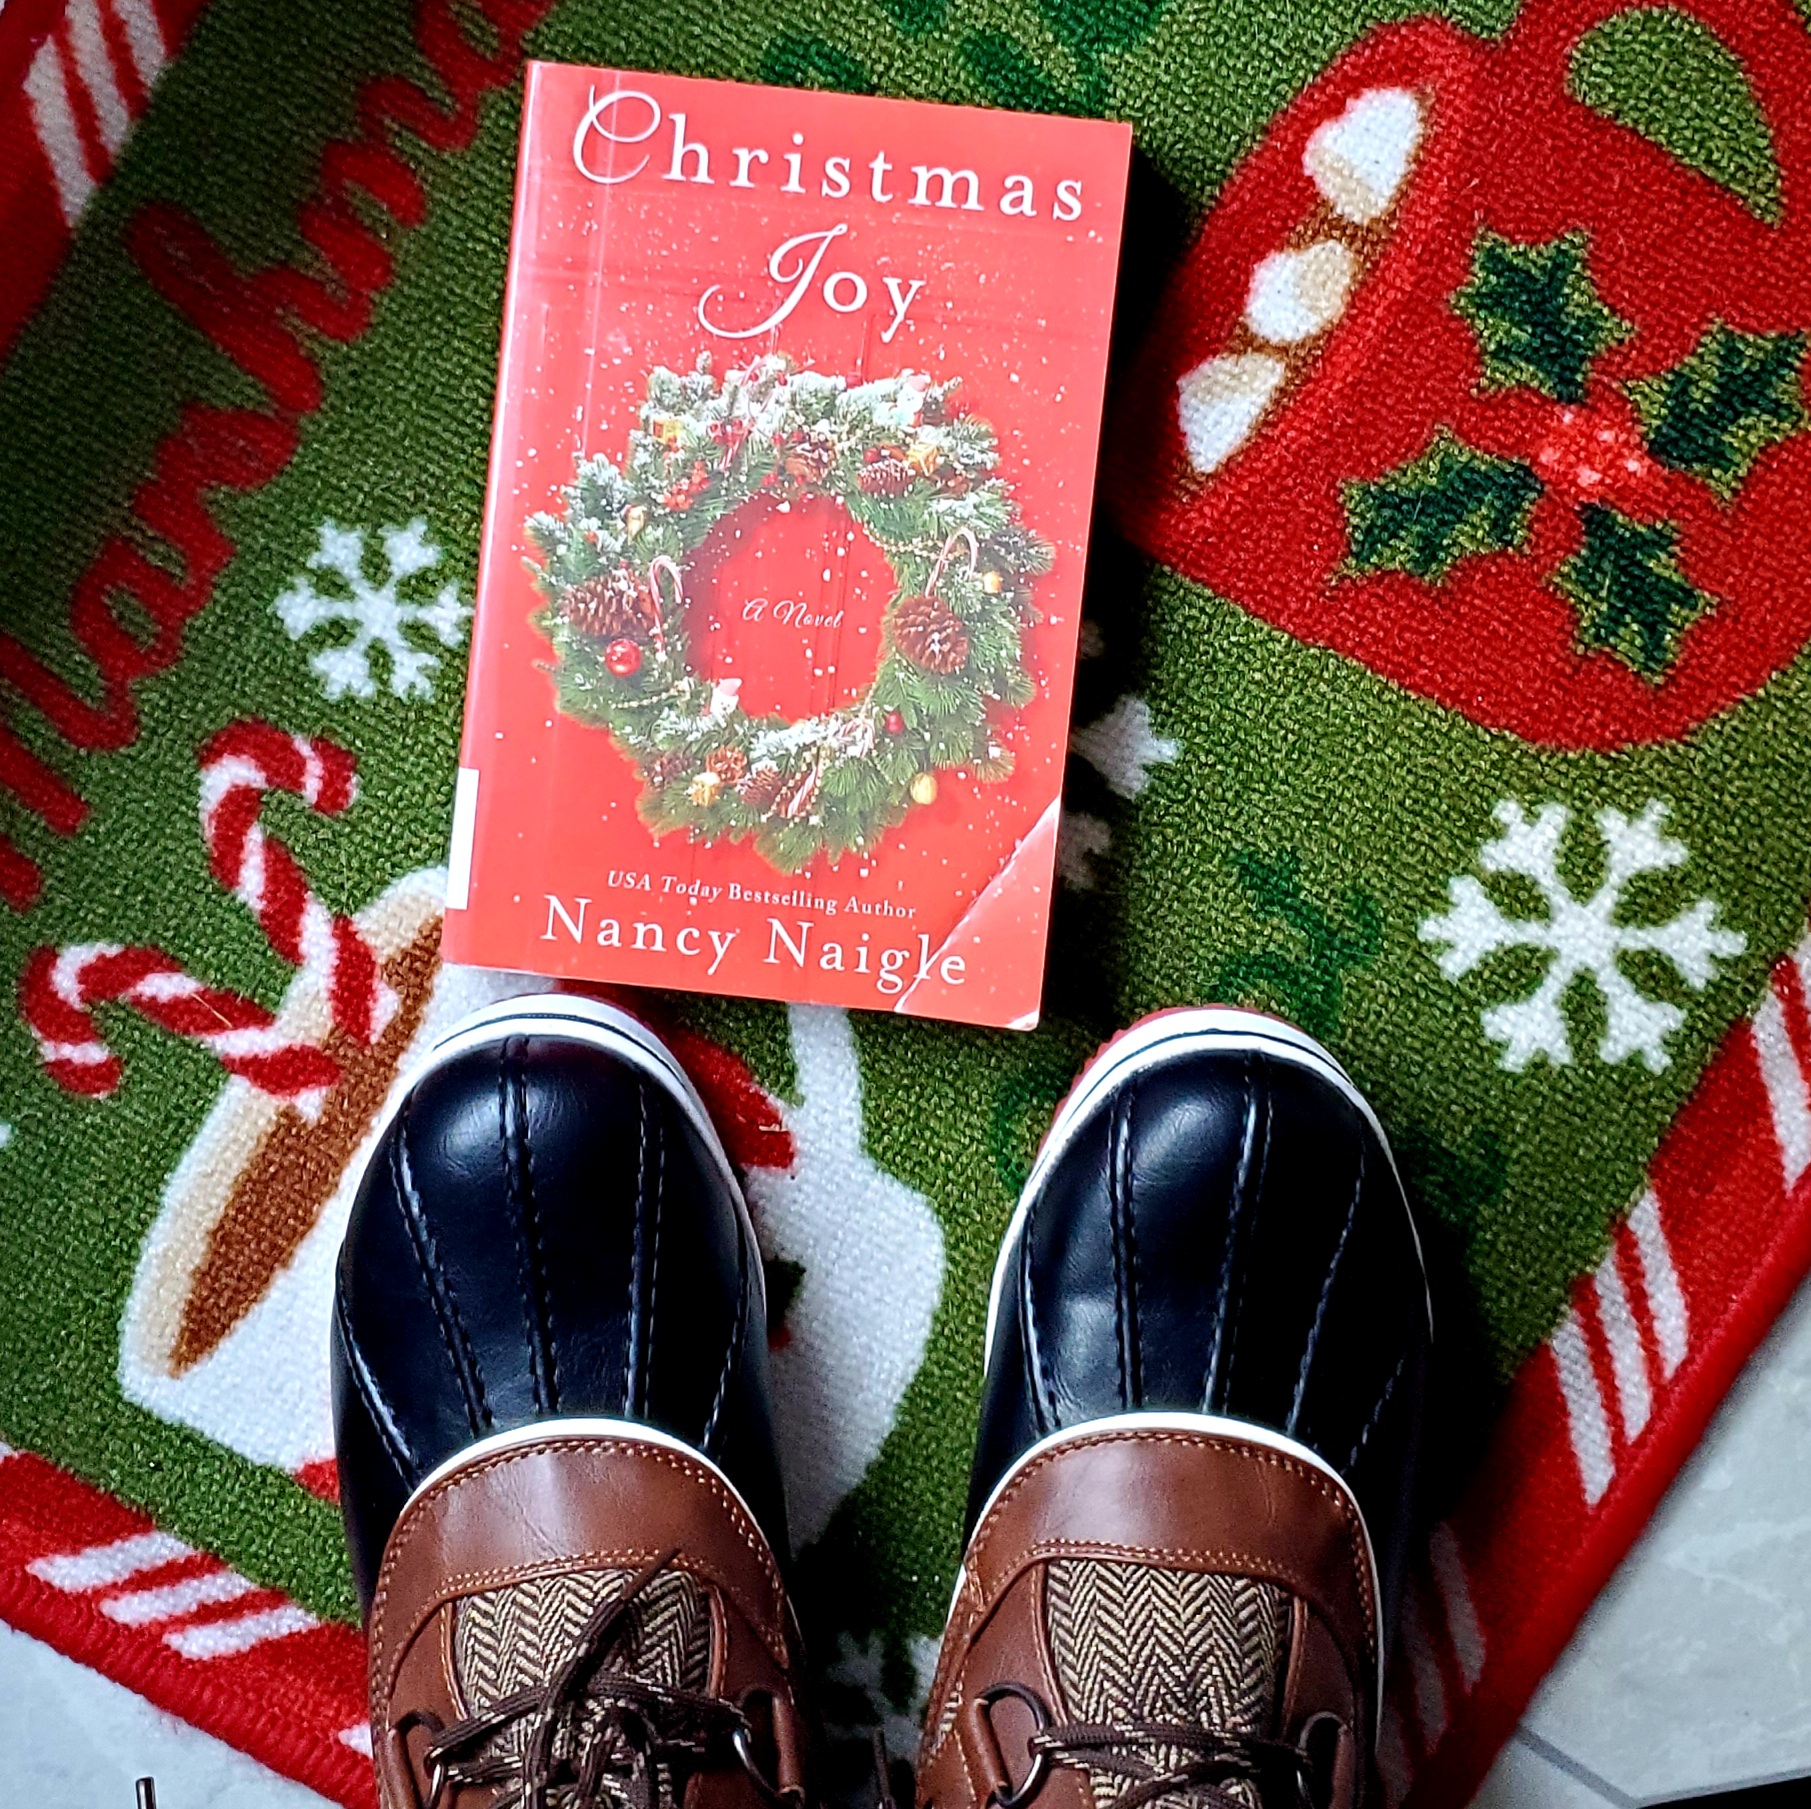 Book cover of Christmas Joy and duck boots